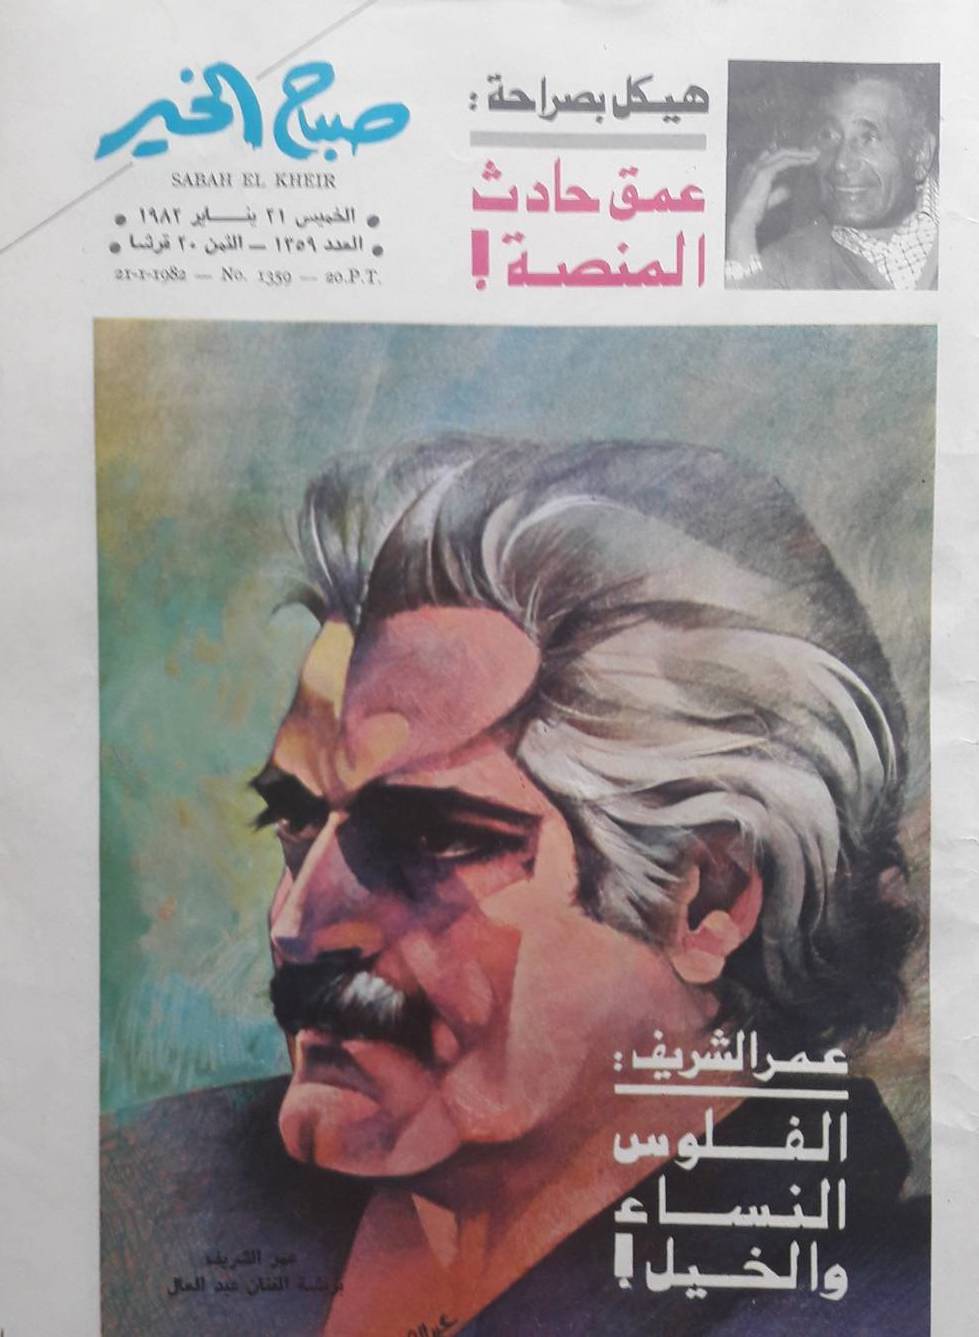 Sabah El kheir issue from 1982